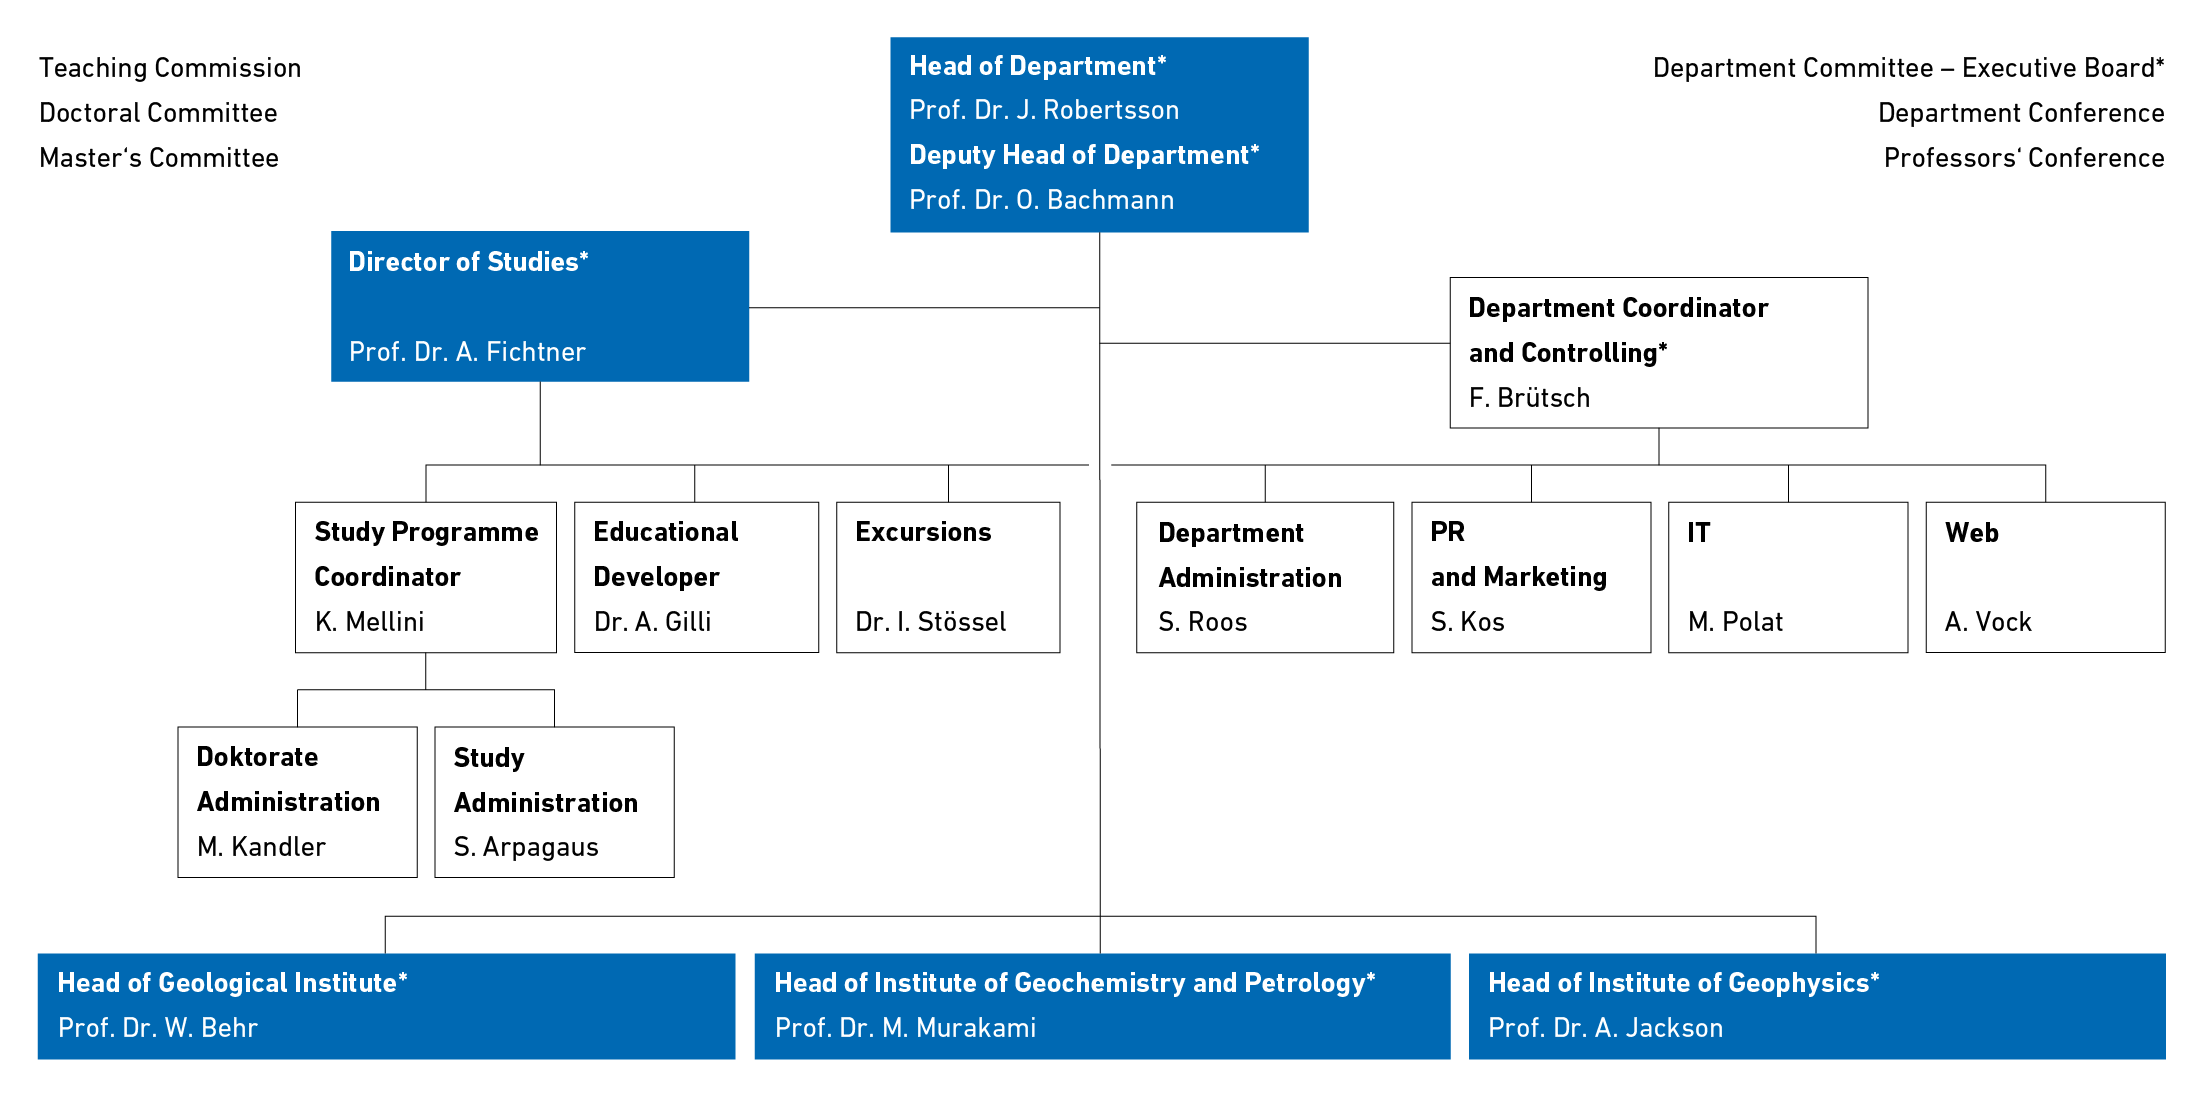 D-ERDW organisational chart with Executive Board and Department Administration